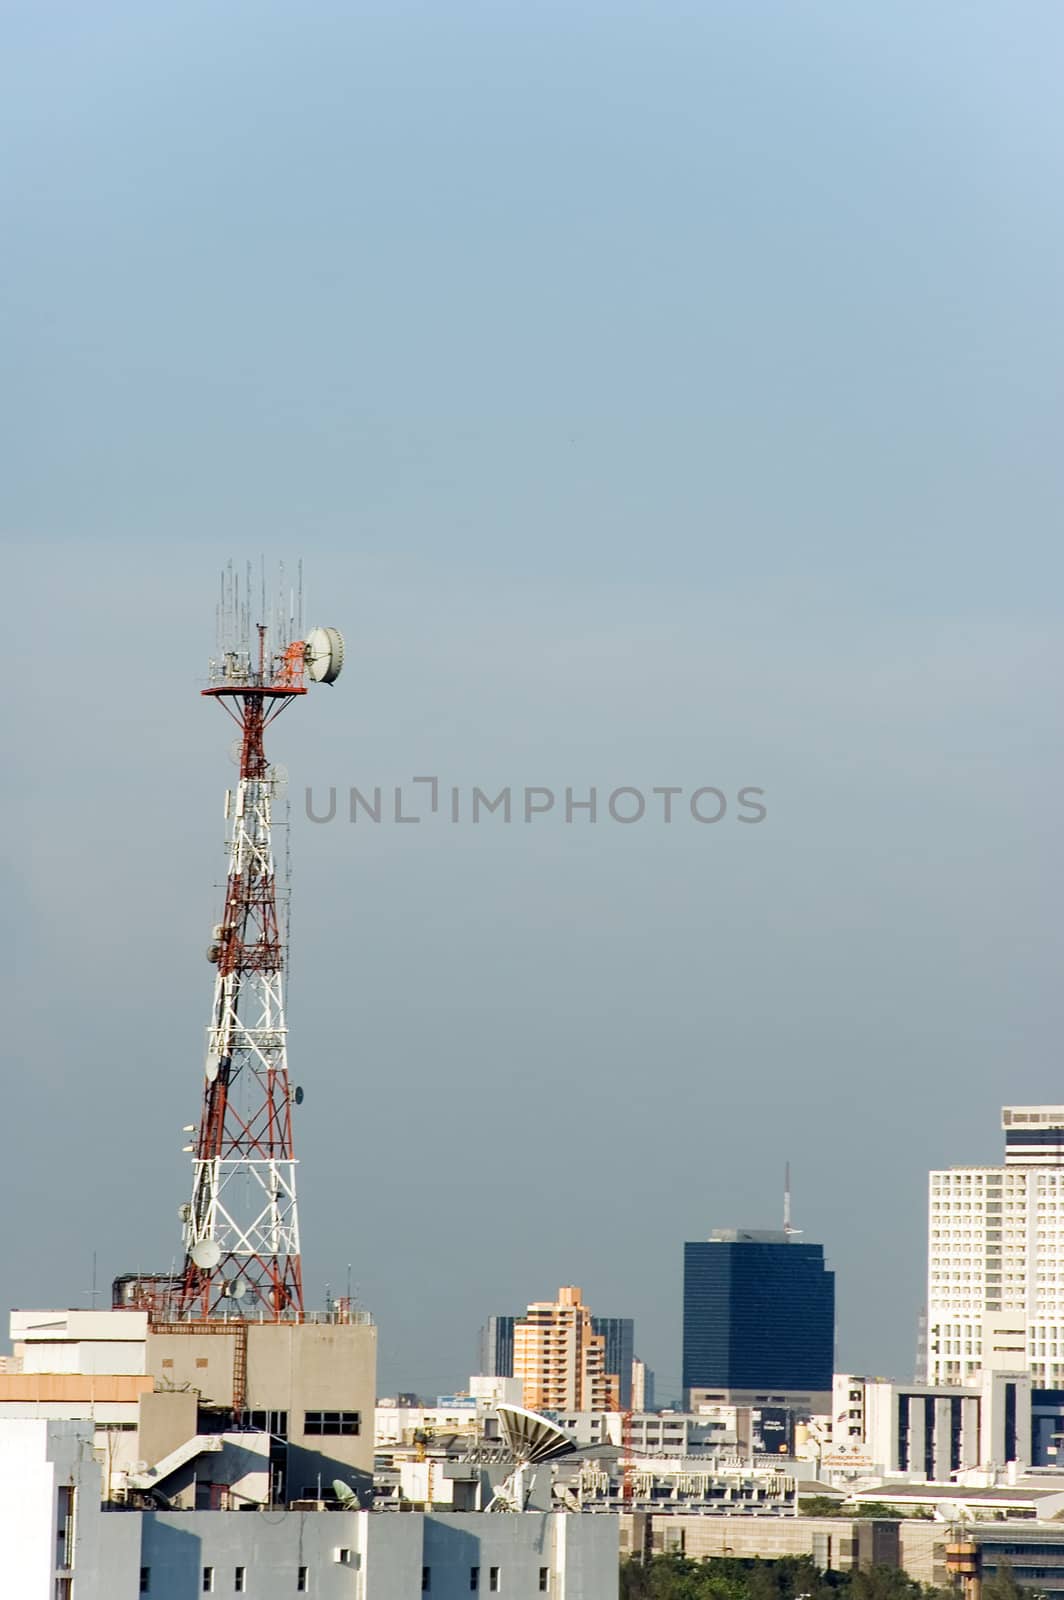 communications tower